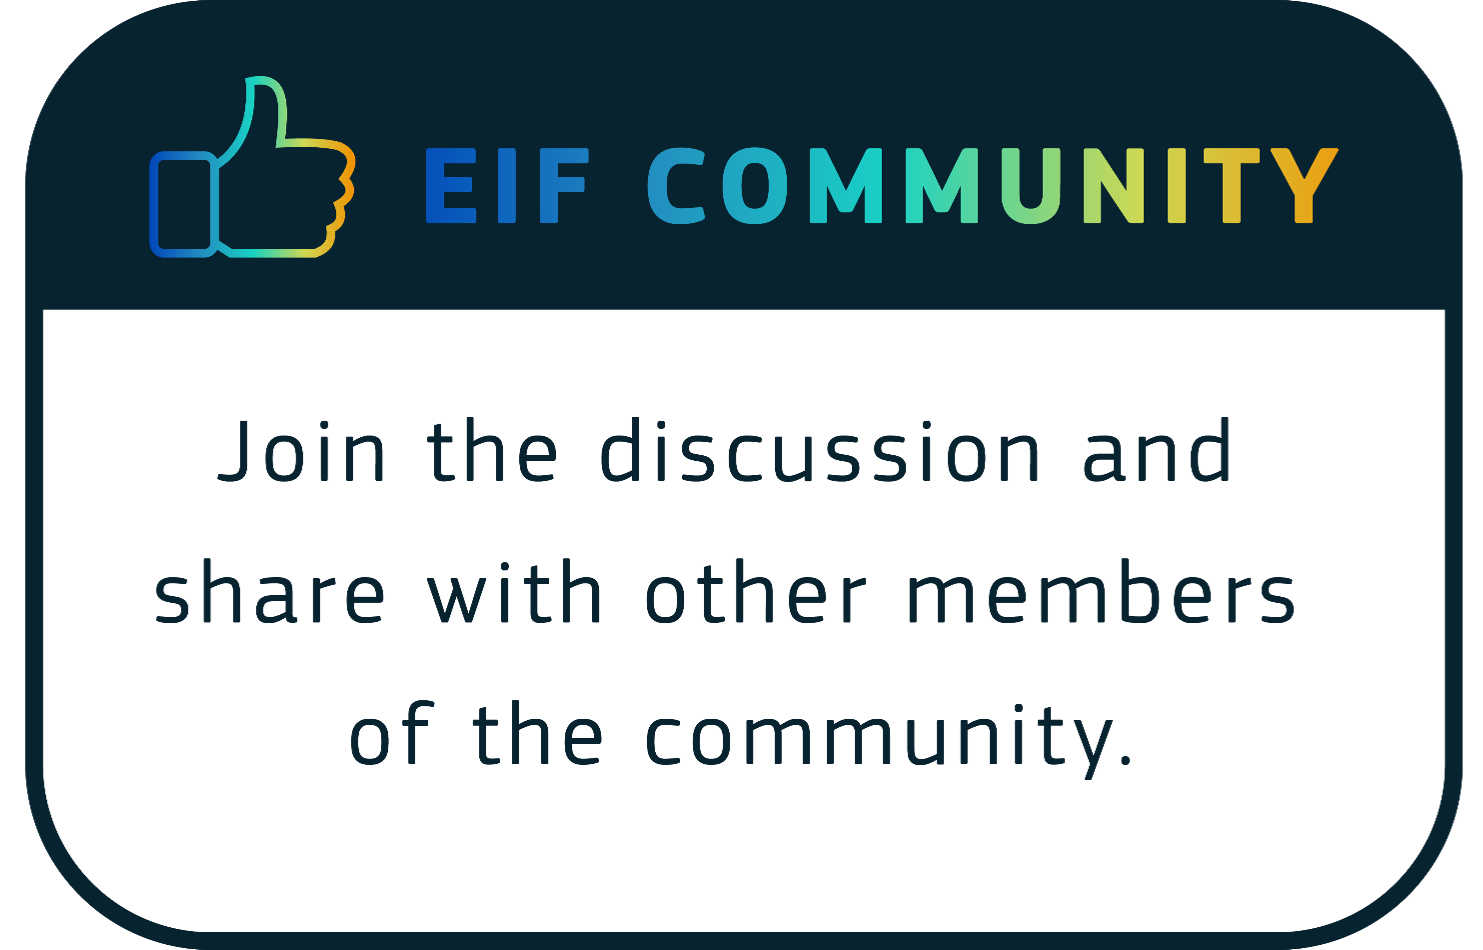 EIF community: Join the discussions and share with other members of the community